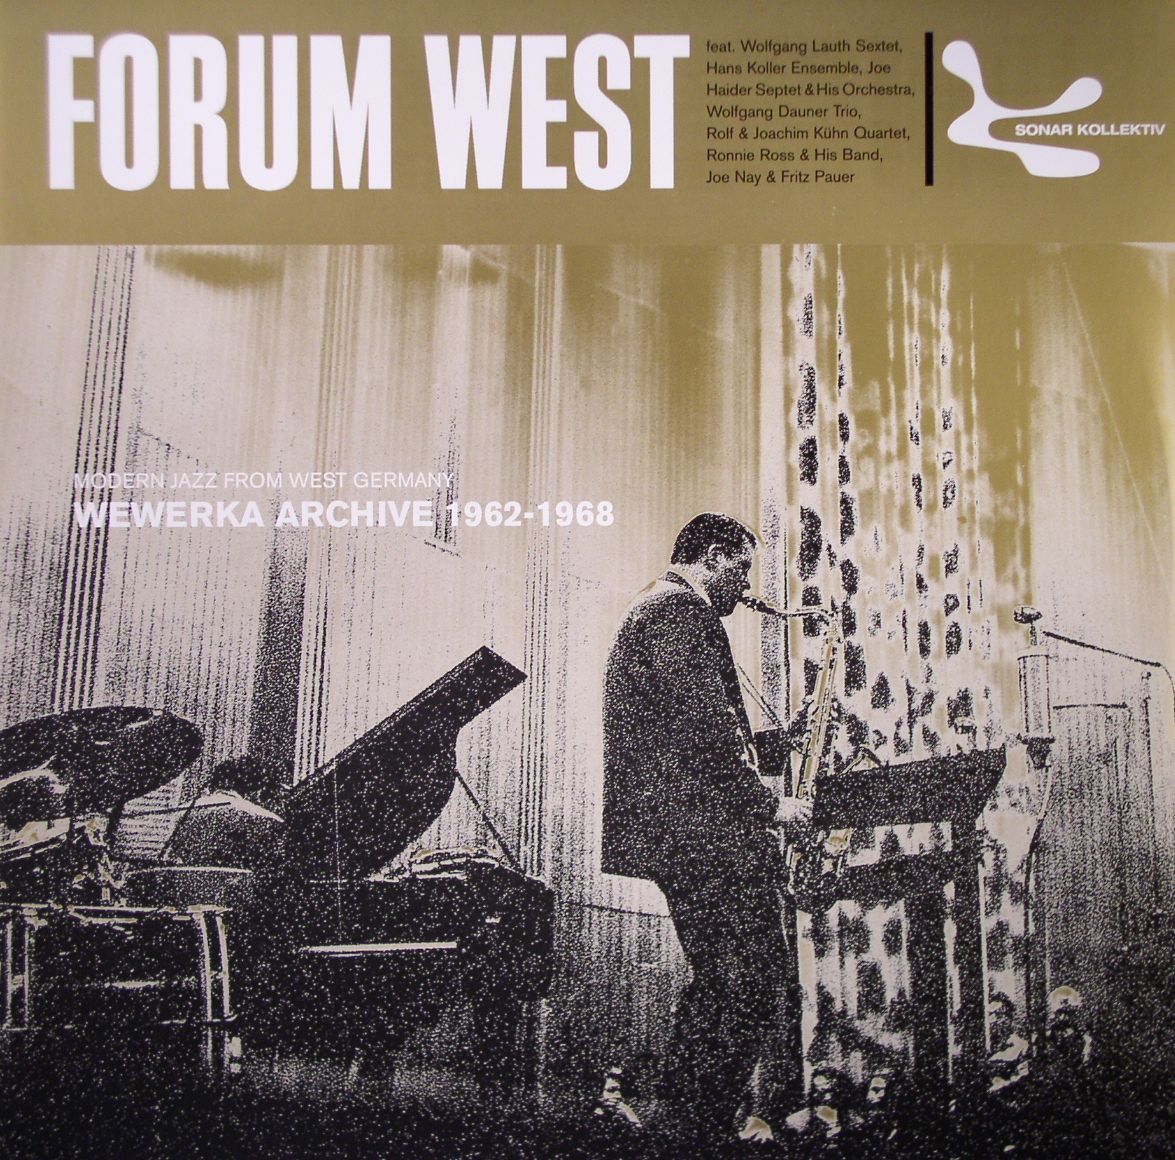 VARIOUS - Forum West: Modern Jazz From West Germany (Wewerka Archive 1962-1968)